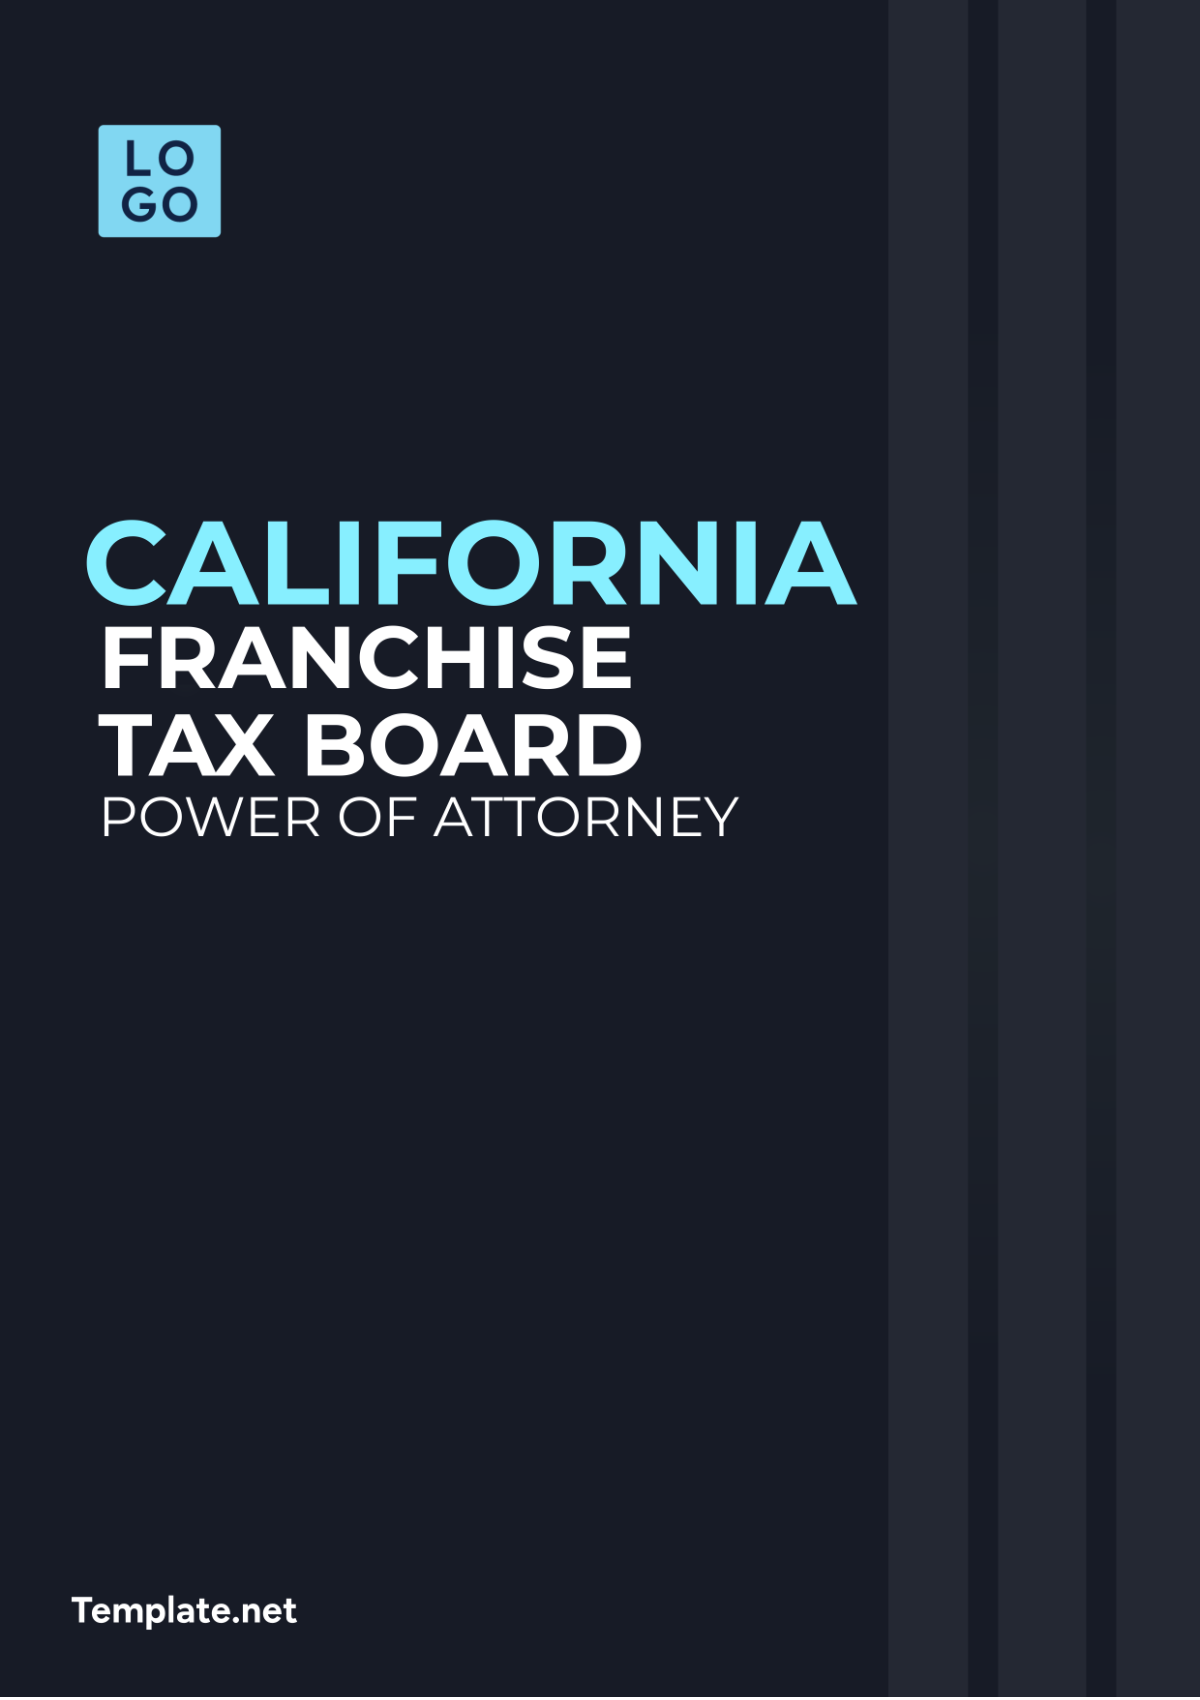 California Franchise Tax Board Power of Attorney Template